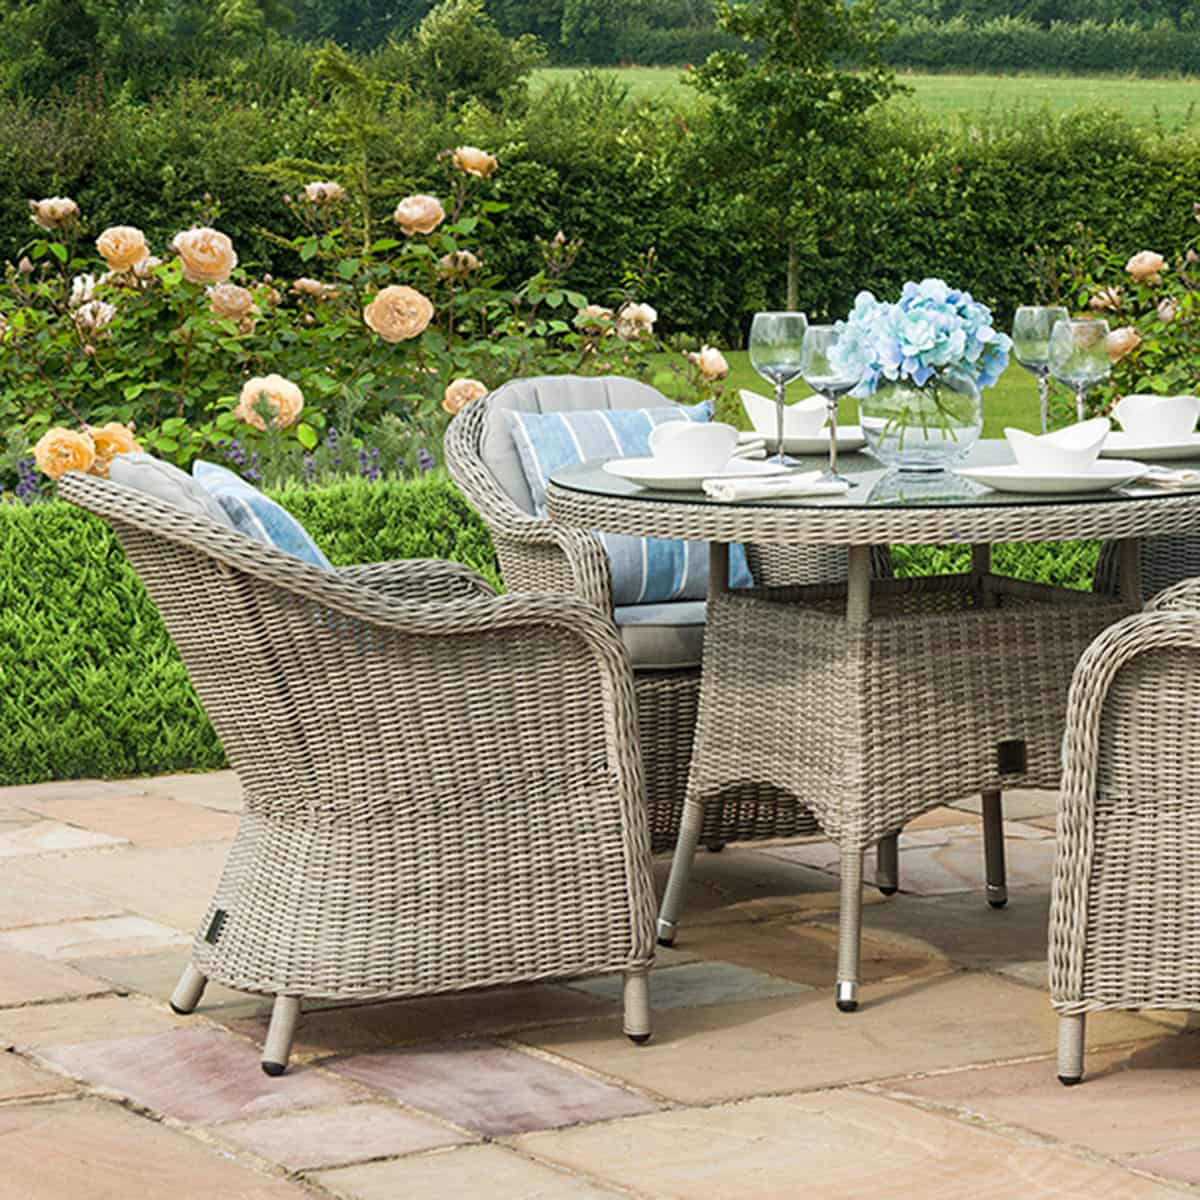 Light grey rattan 4 seat round dining set with heritage chairs